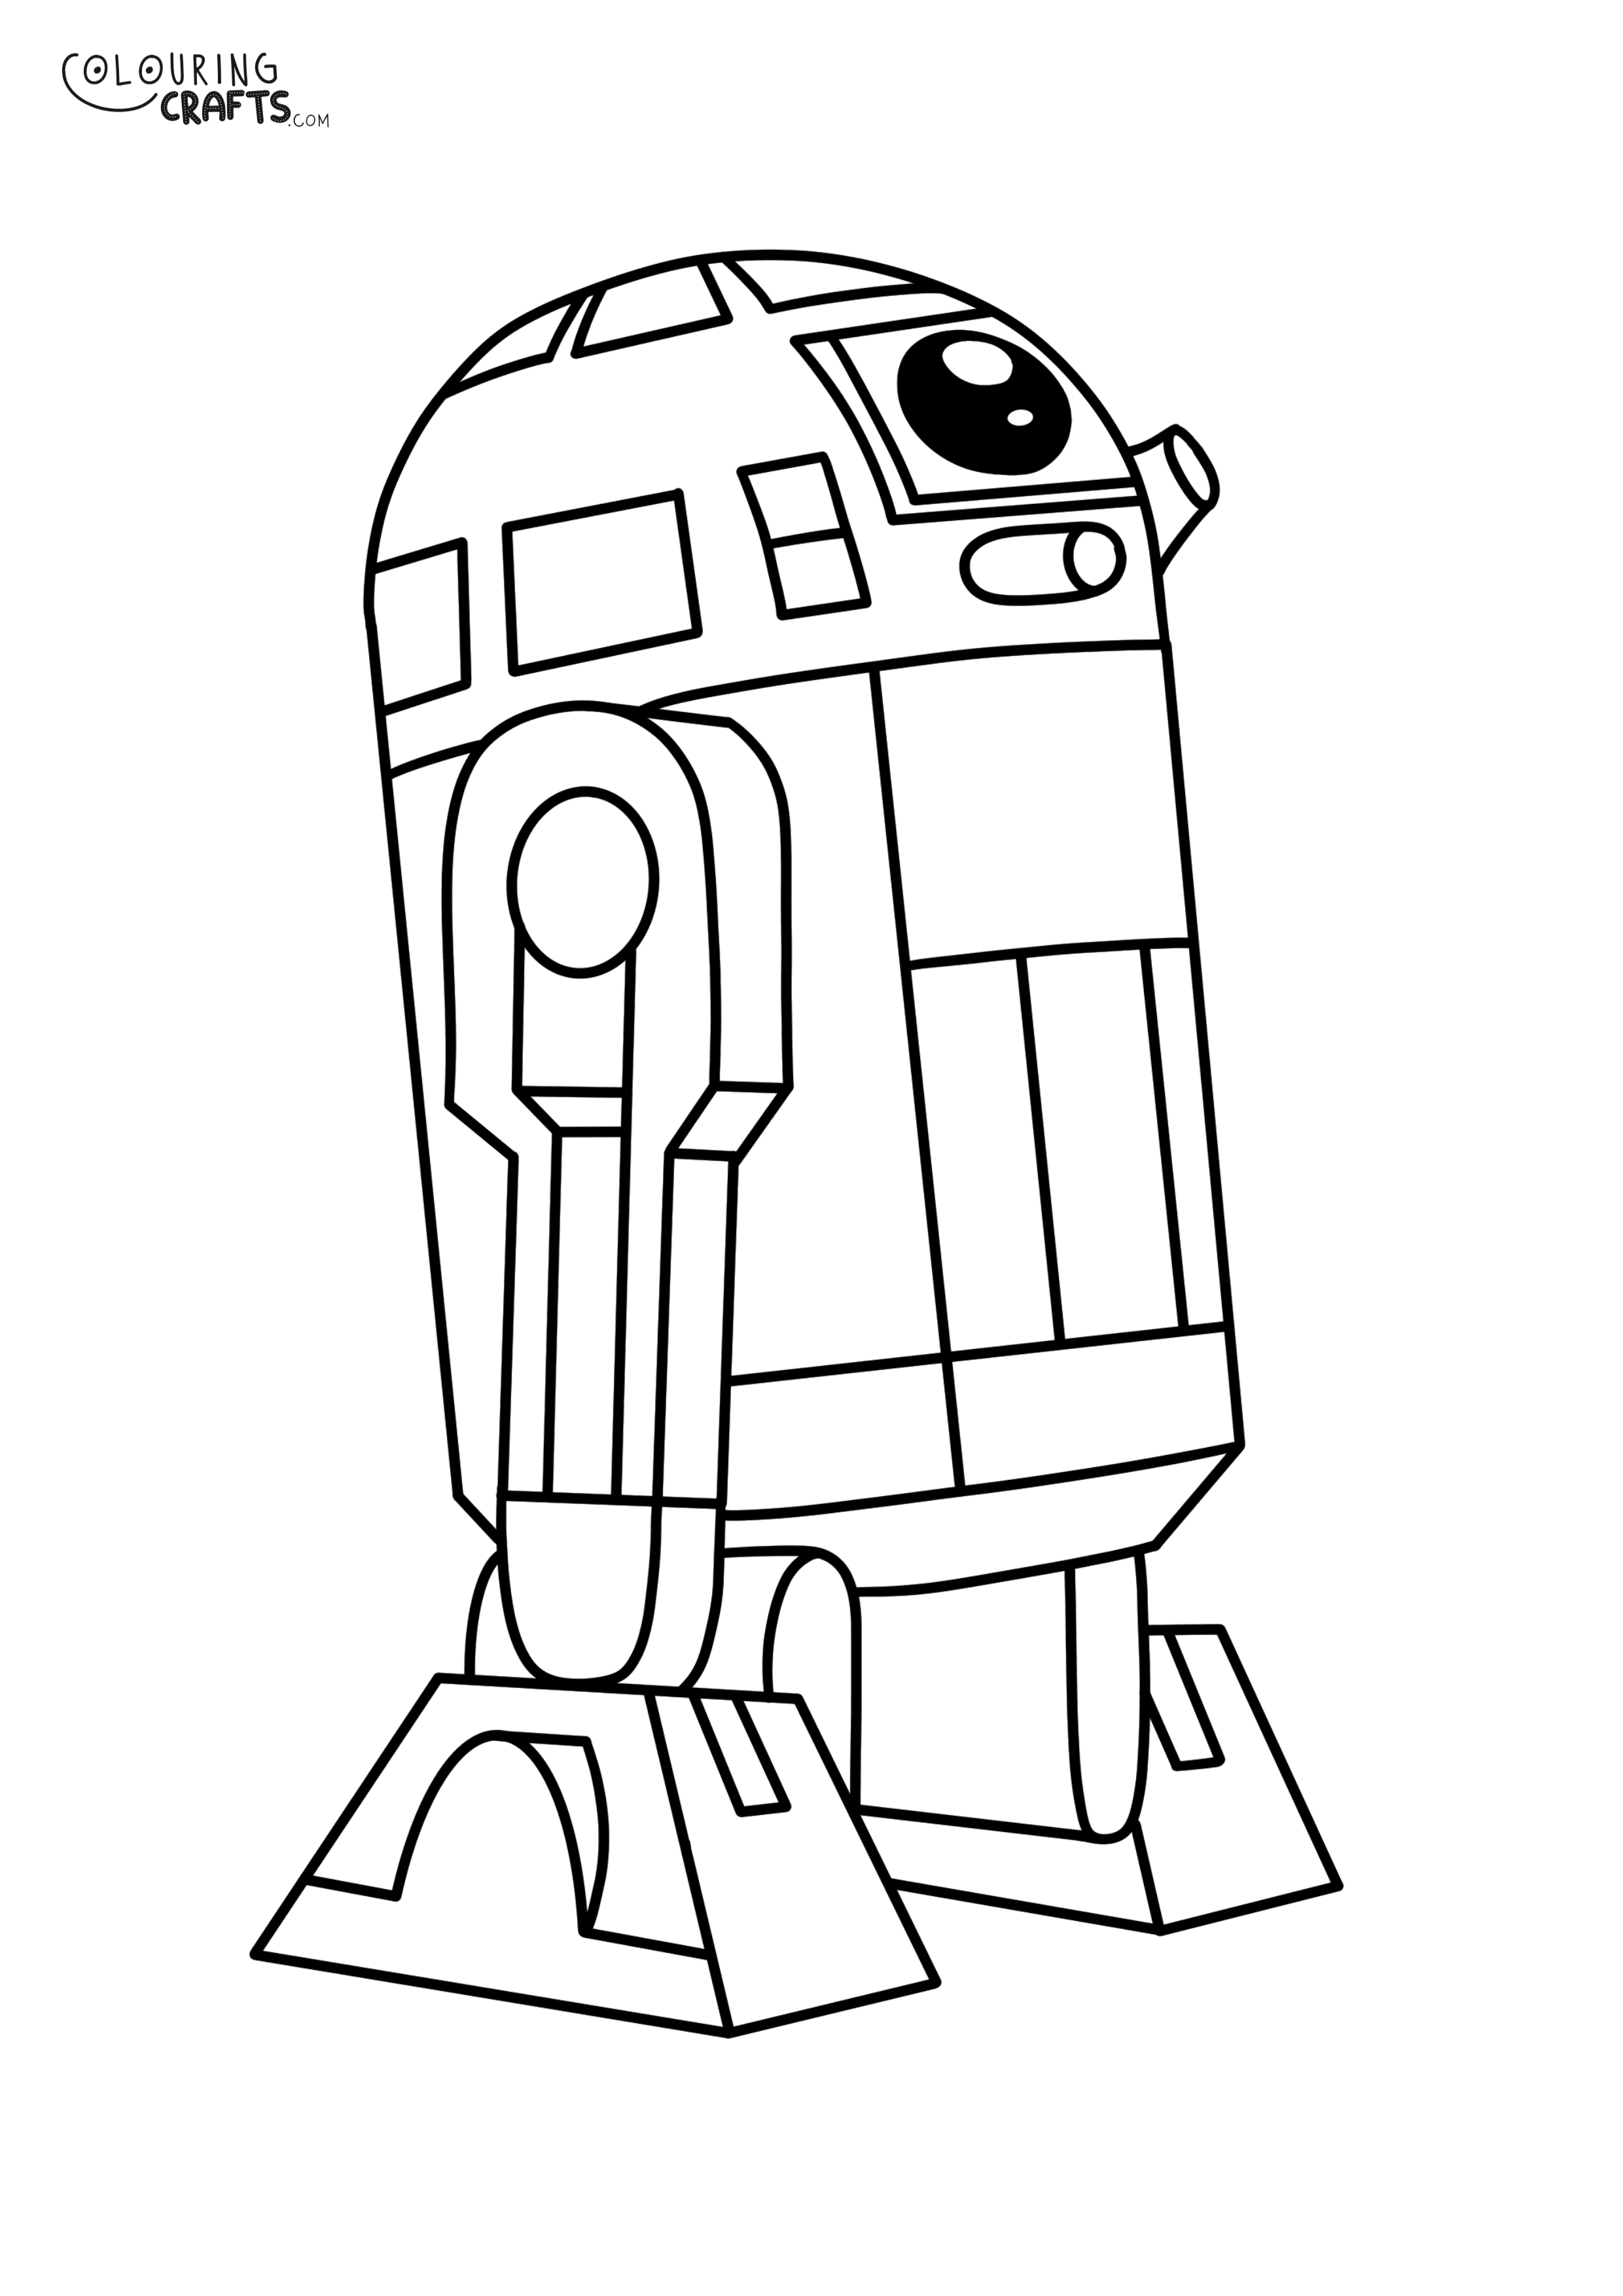 Star Wars R2-D2 Colouring Page - Colouring Crafts